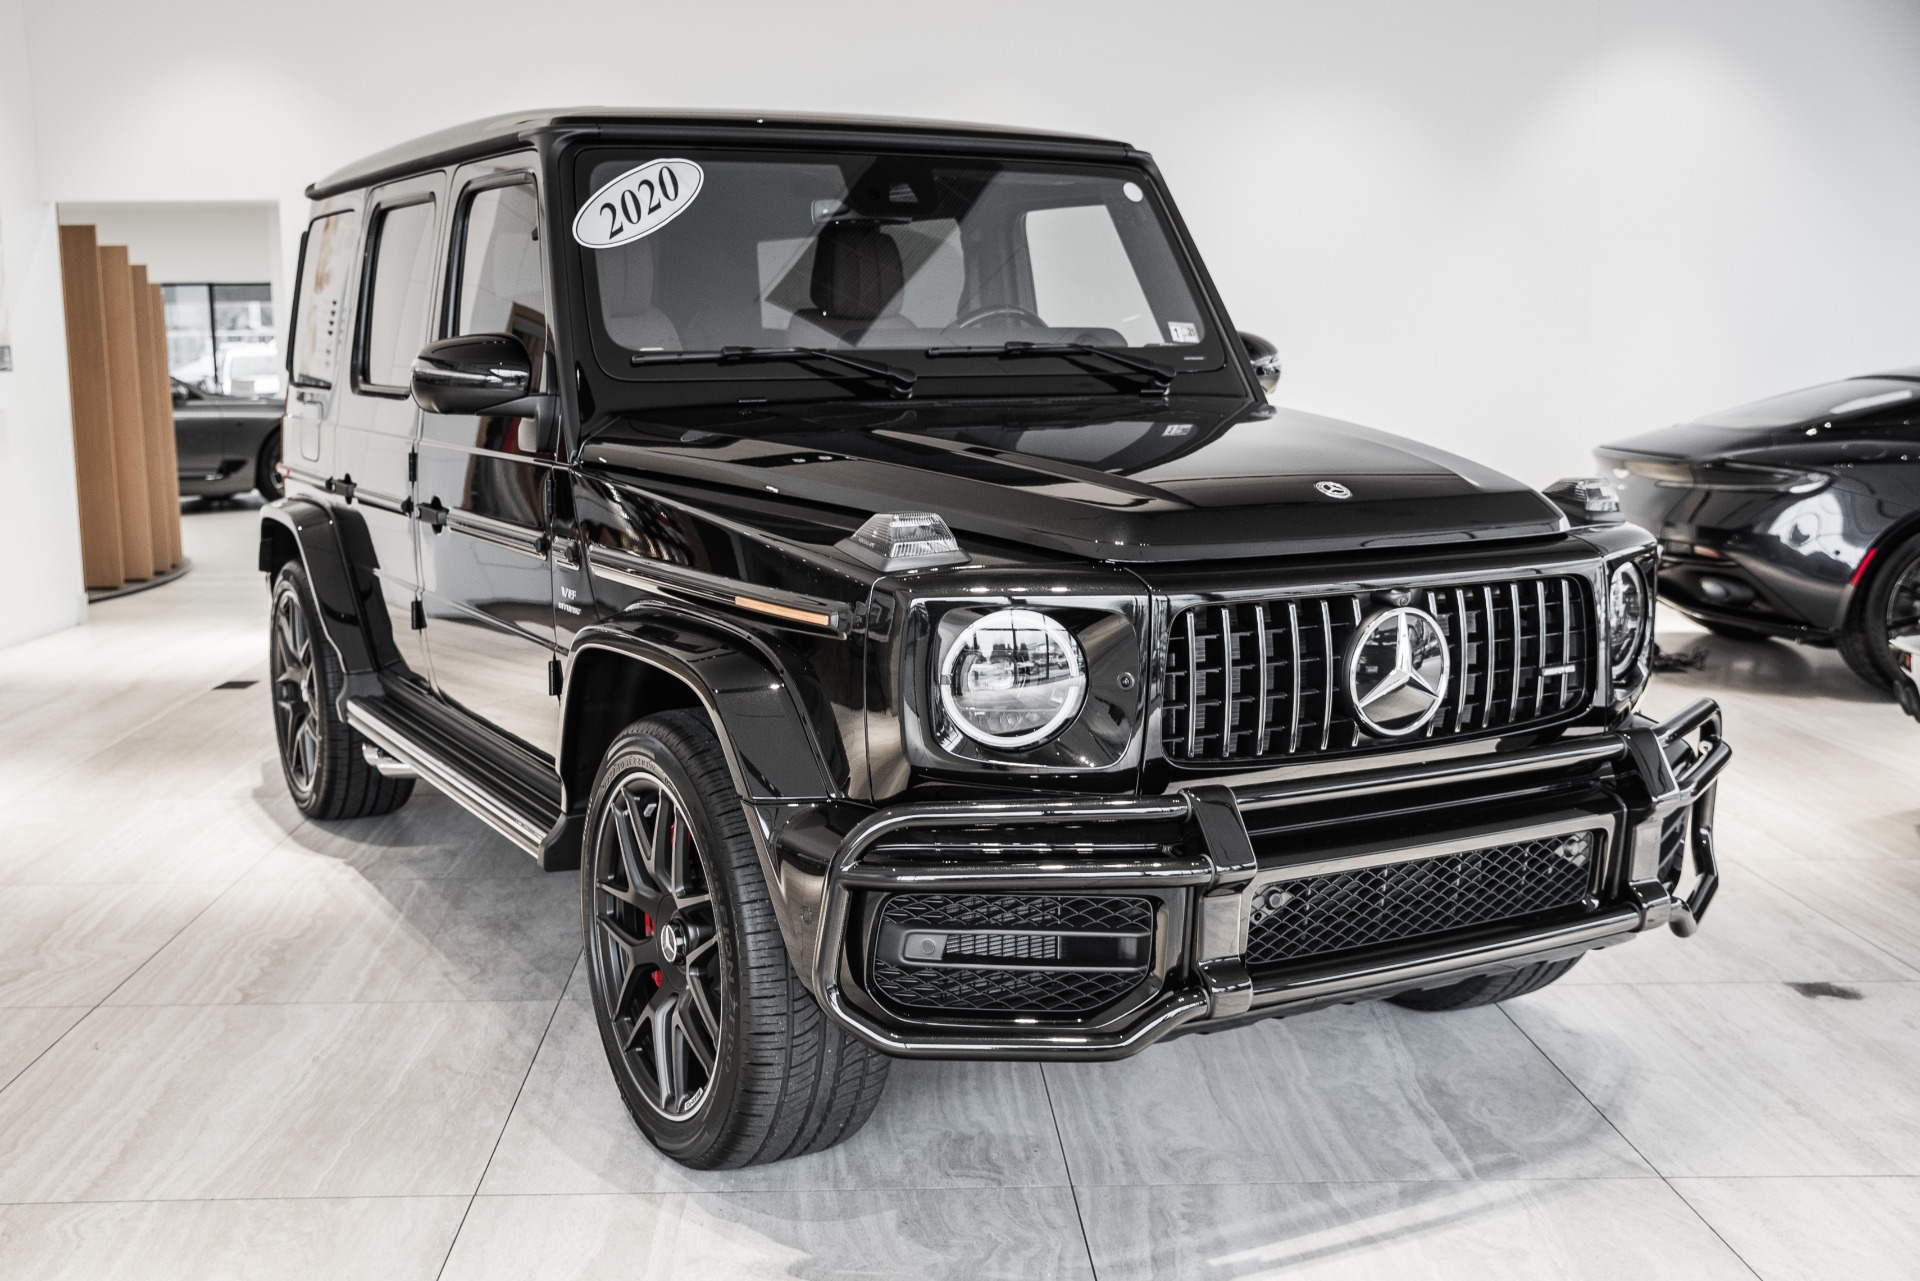 This $875,000 Brabus G-Class Has 888 Horsepower - The Car Guide